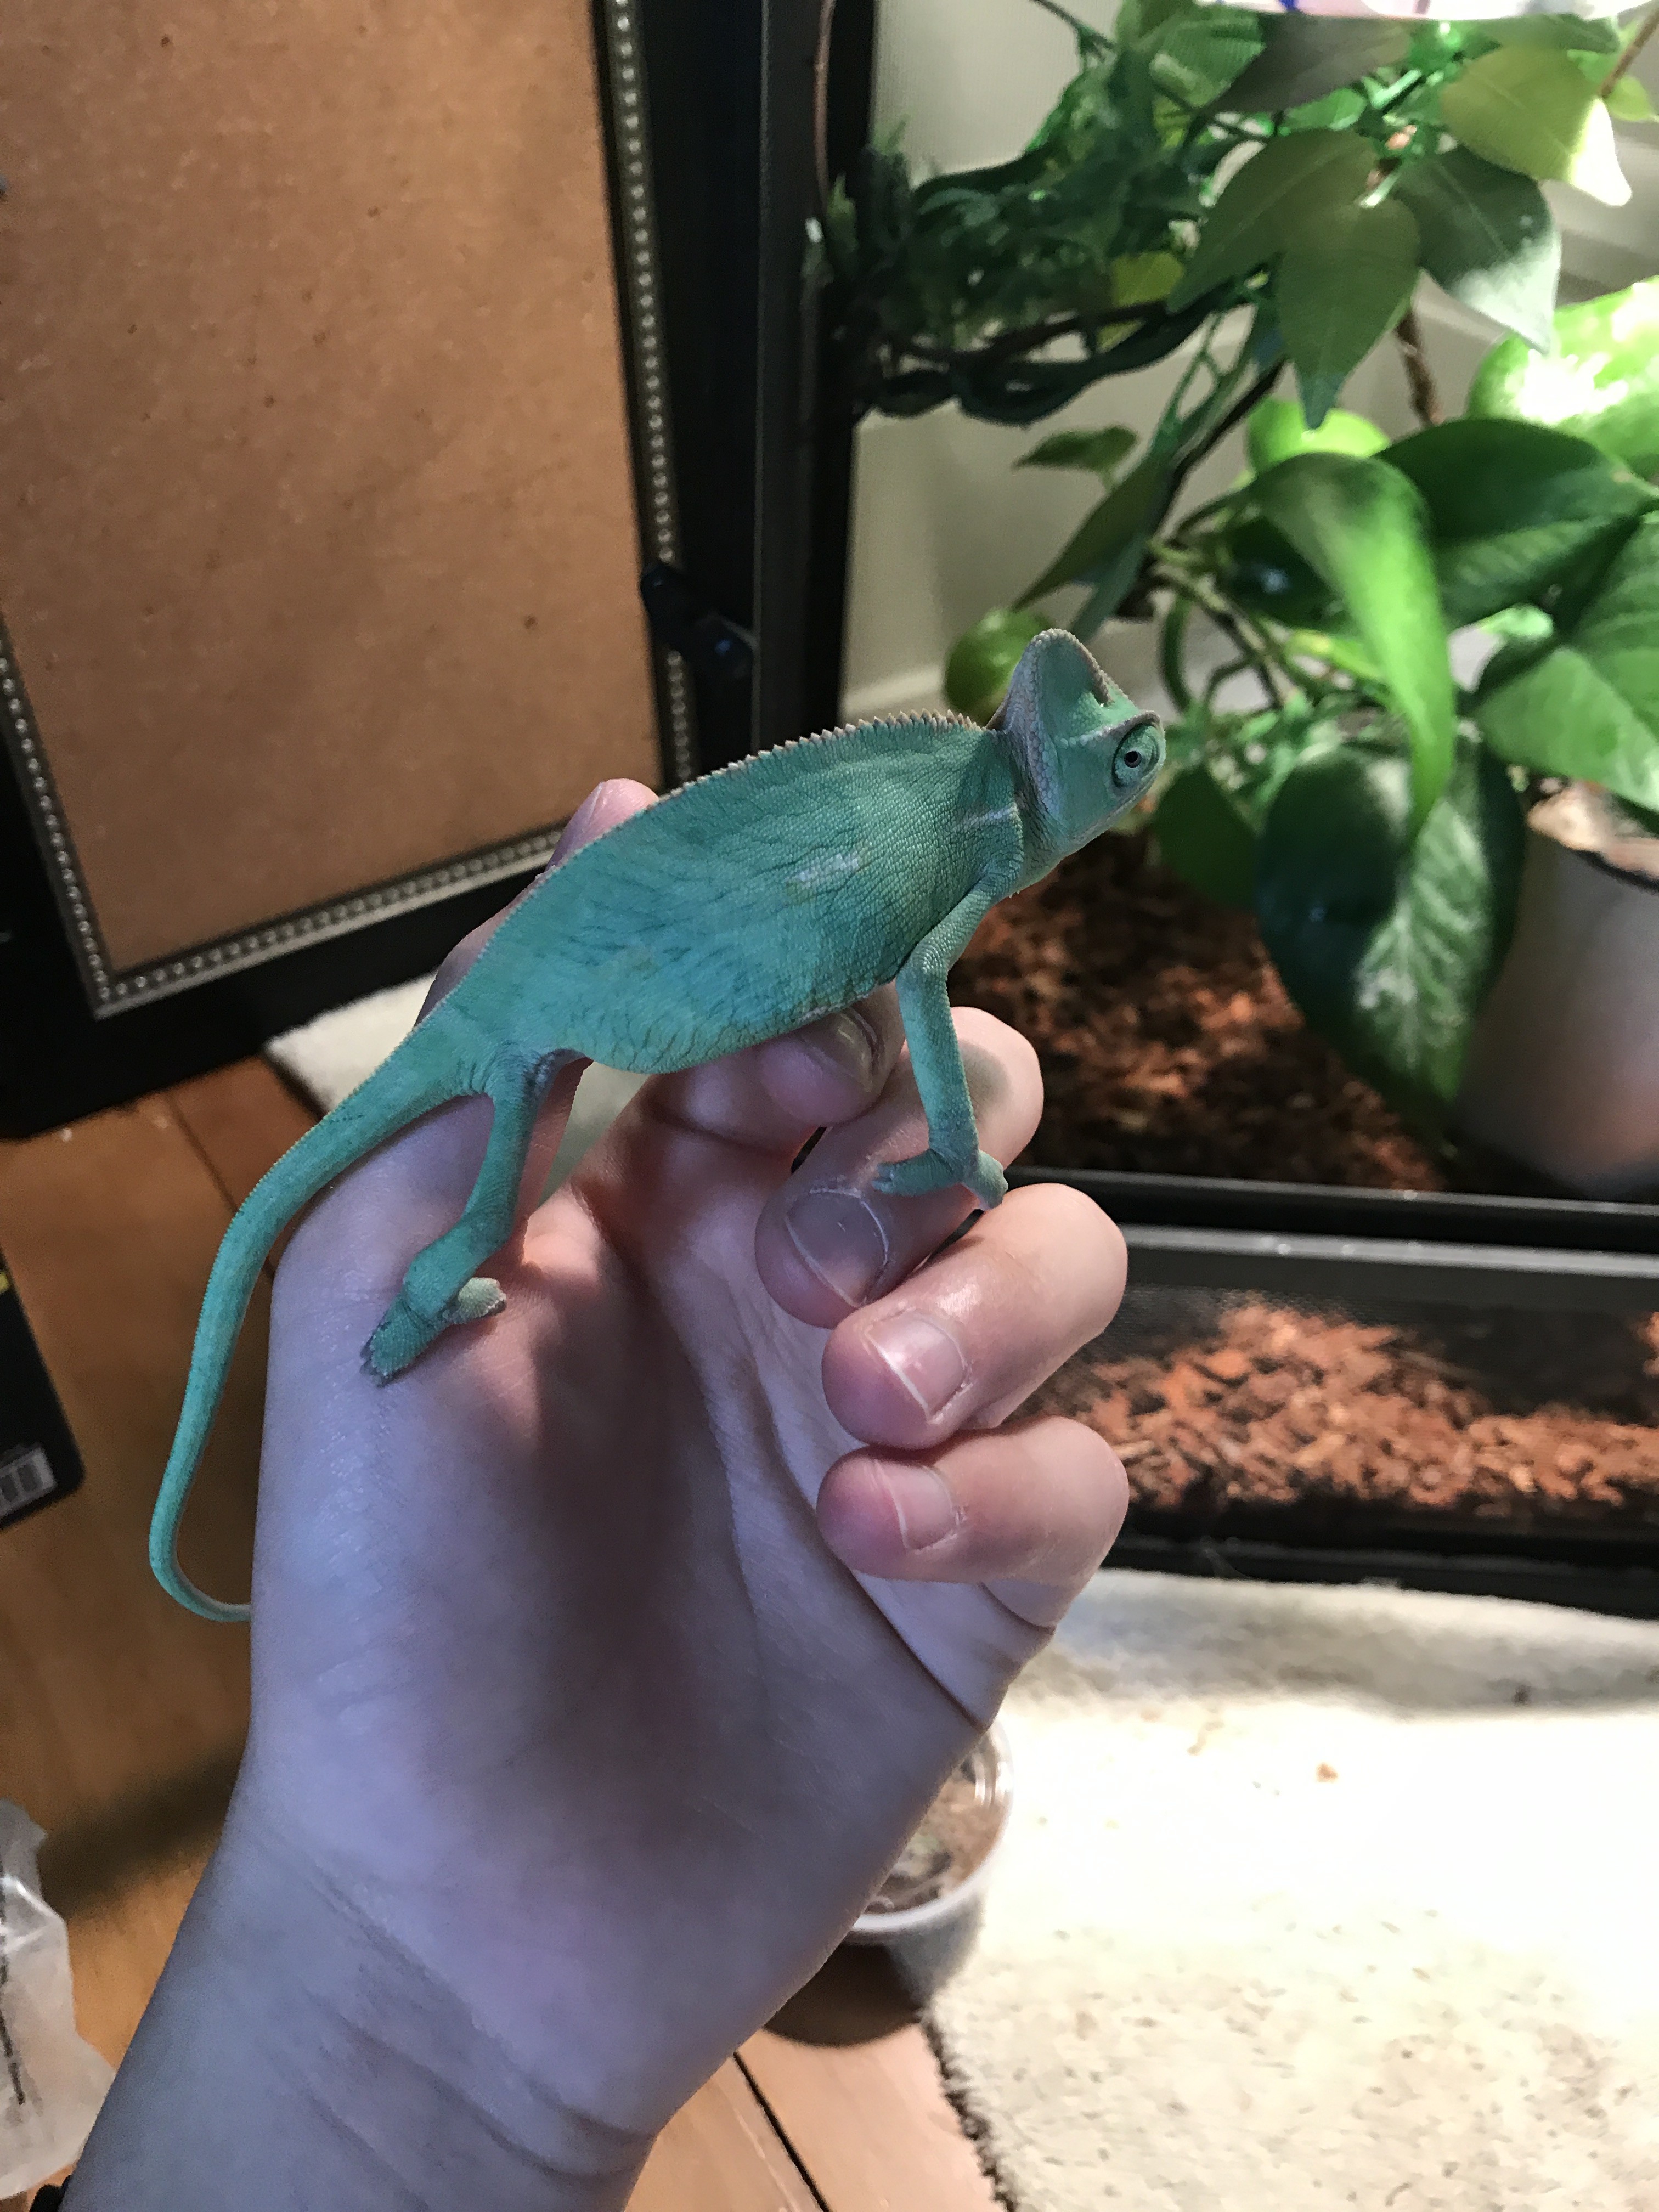 Is anything wrong with my chameleon? | Chameleon Forums